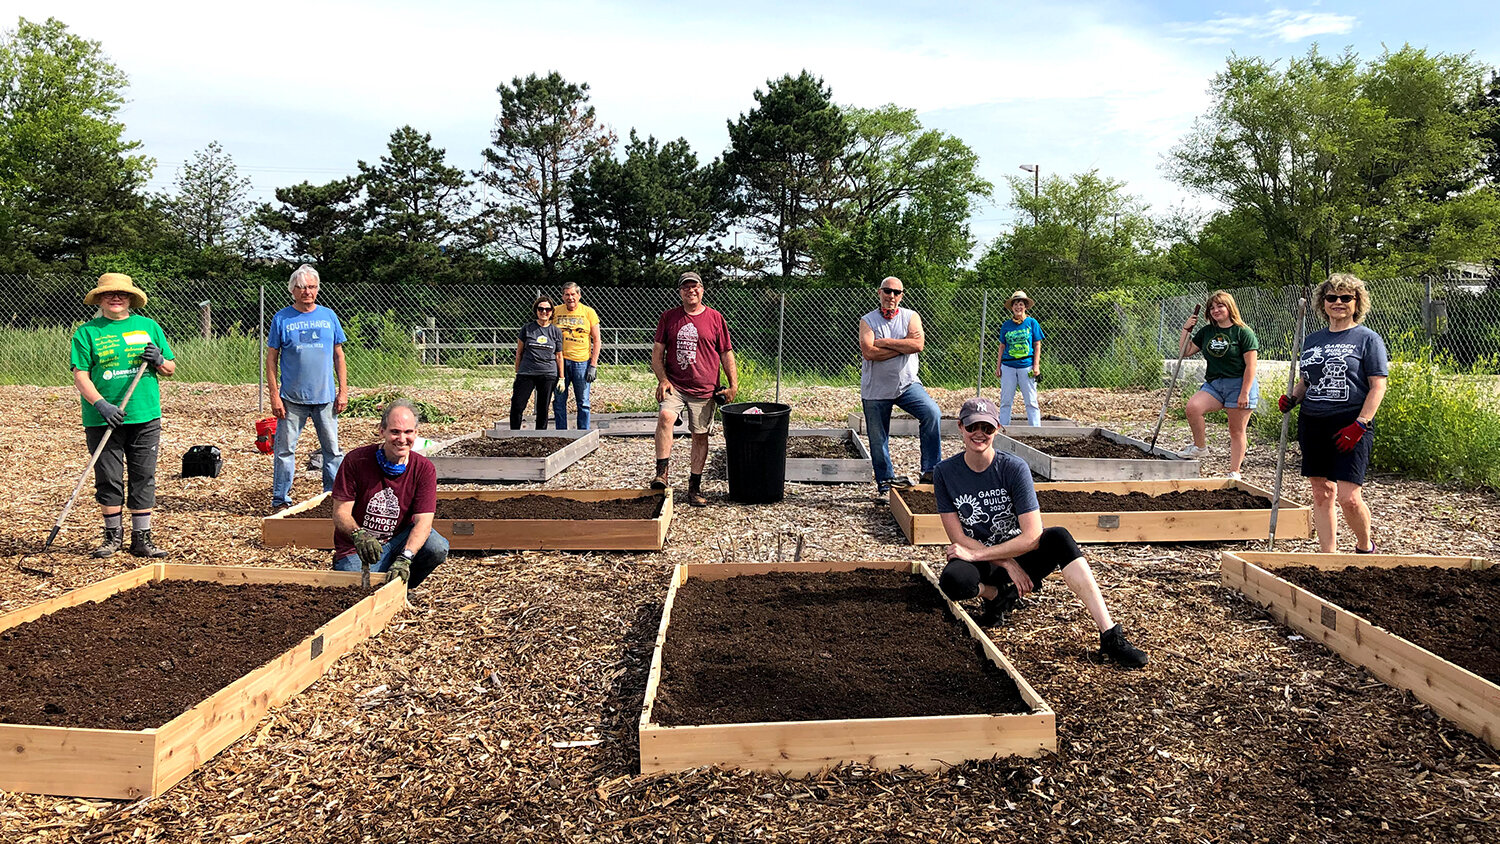  This year, despite the challenges of COVID-19 and the social distancing requirements of the state, The GardenWorks Project gathered a small team of volunteers to help install and prepare for a community garden in Naperville. All proceeds of the gard